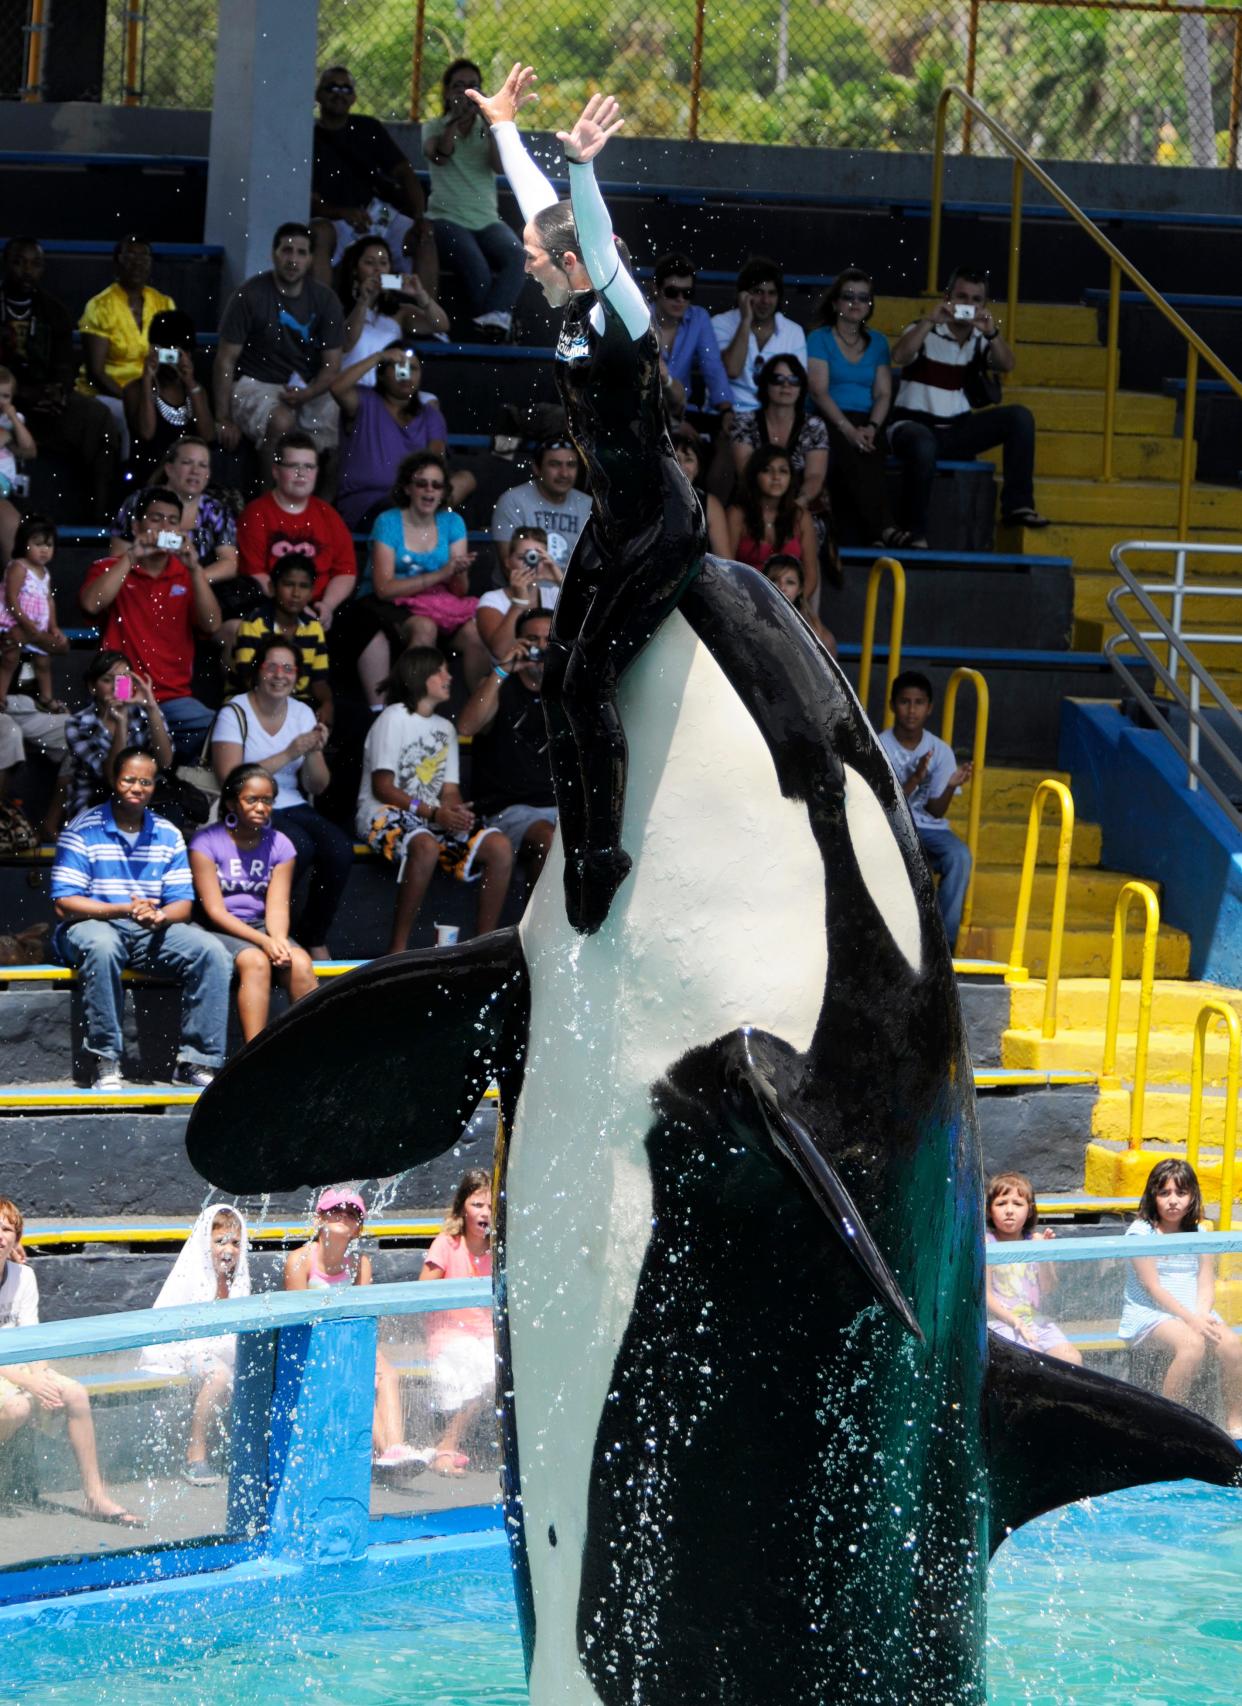 The Miami Seaquarium's Lolita the Killer Whale is no longer performing. She is retired and has been undergoing treatment for an illness for more than a year.